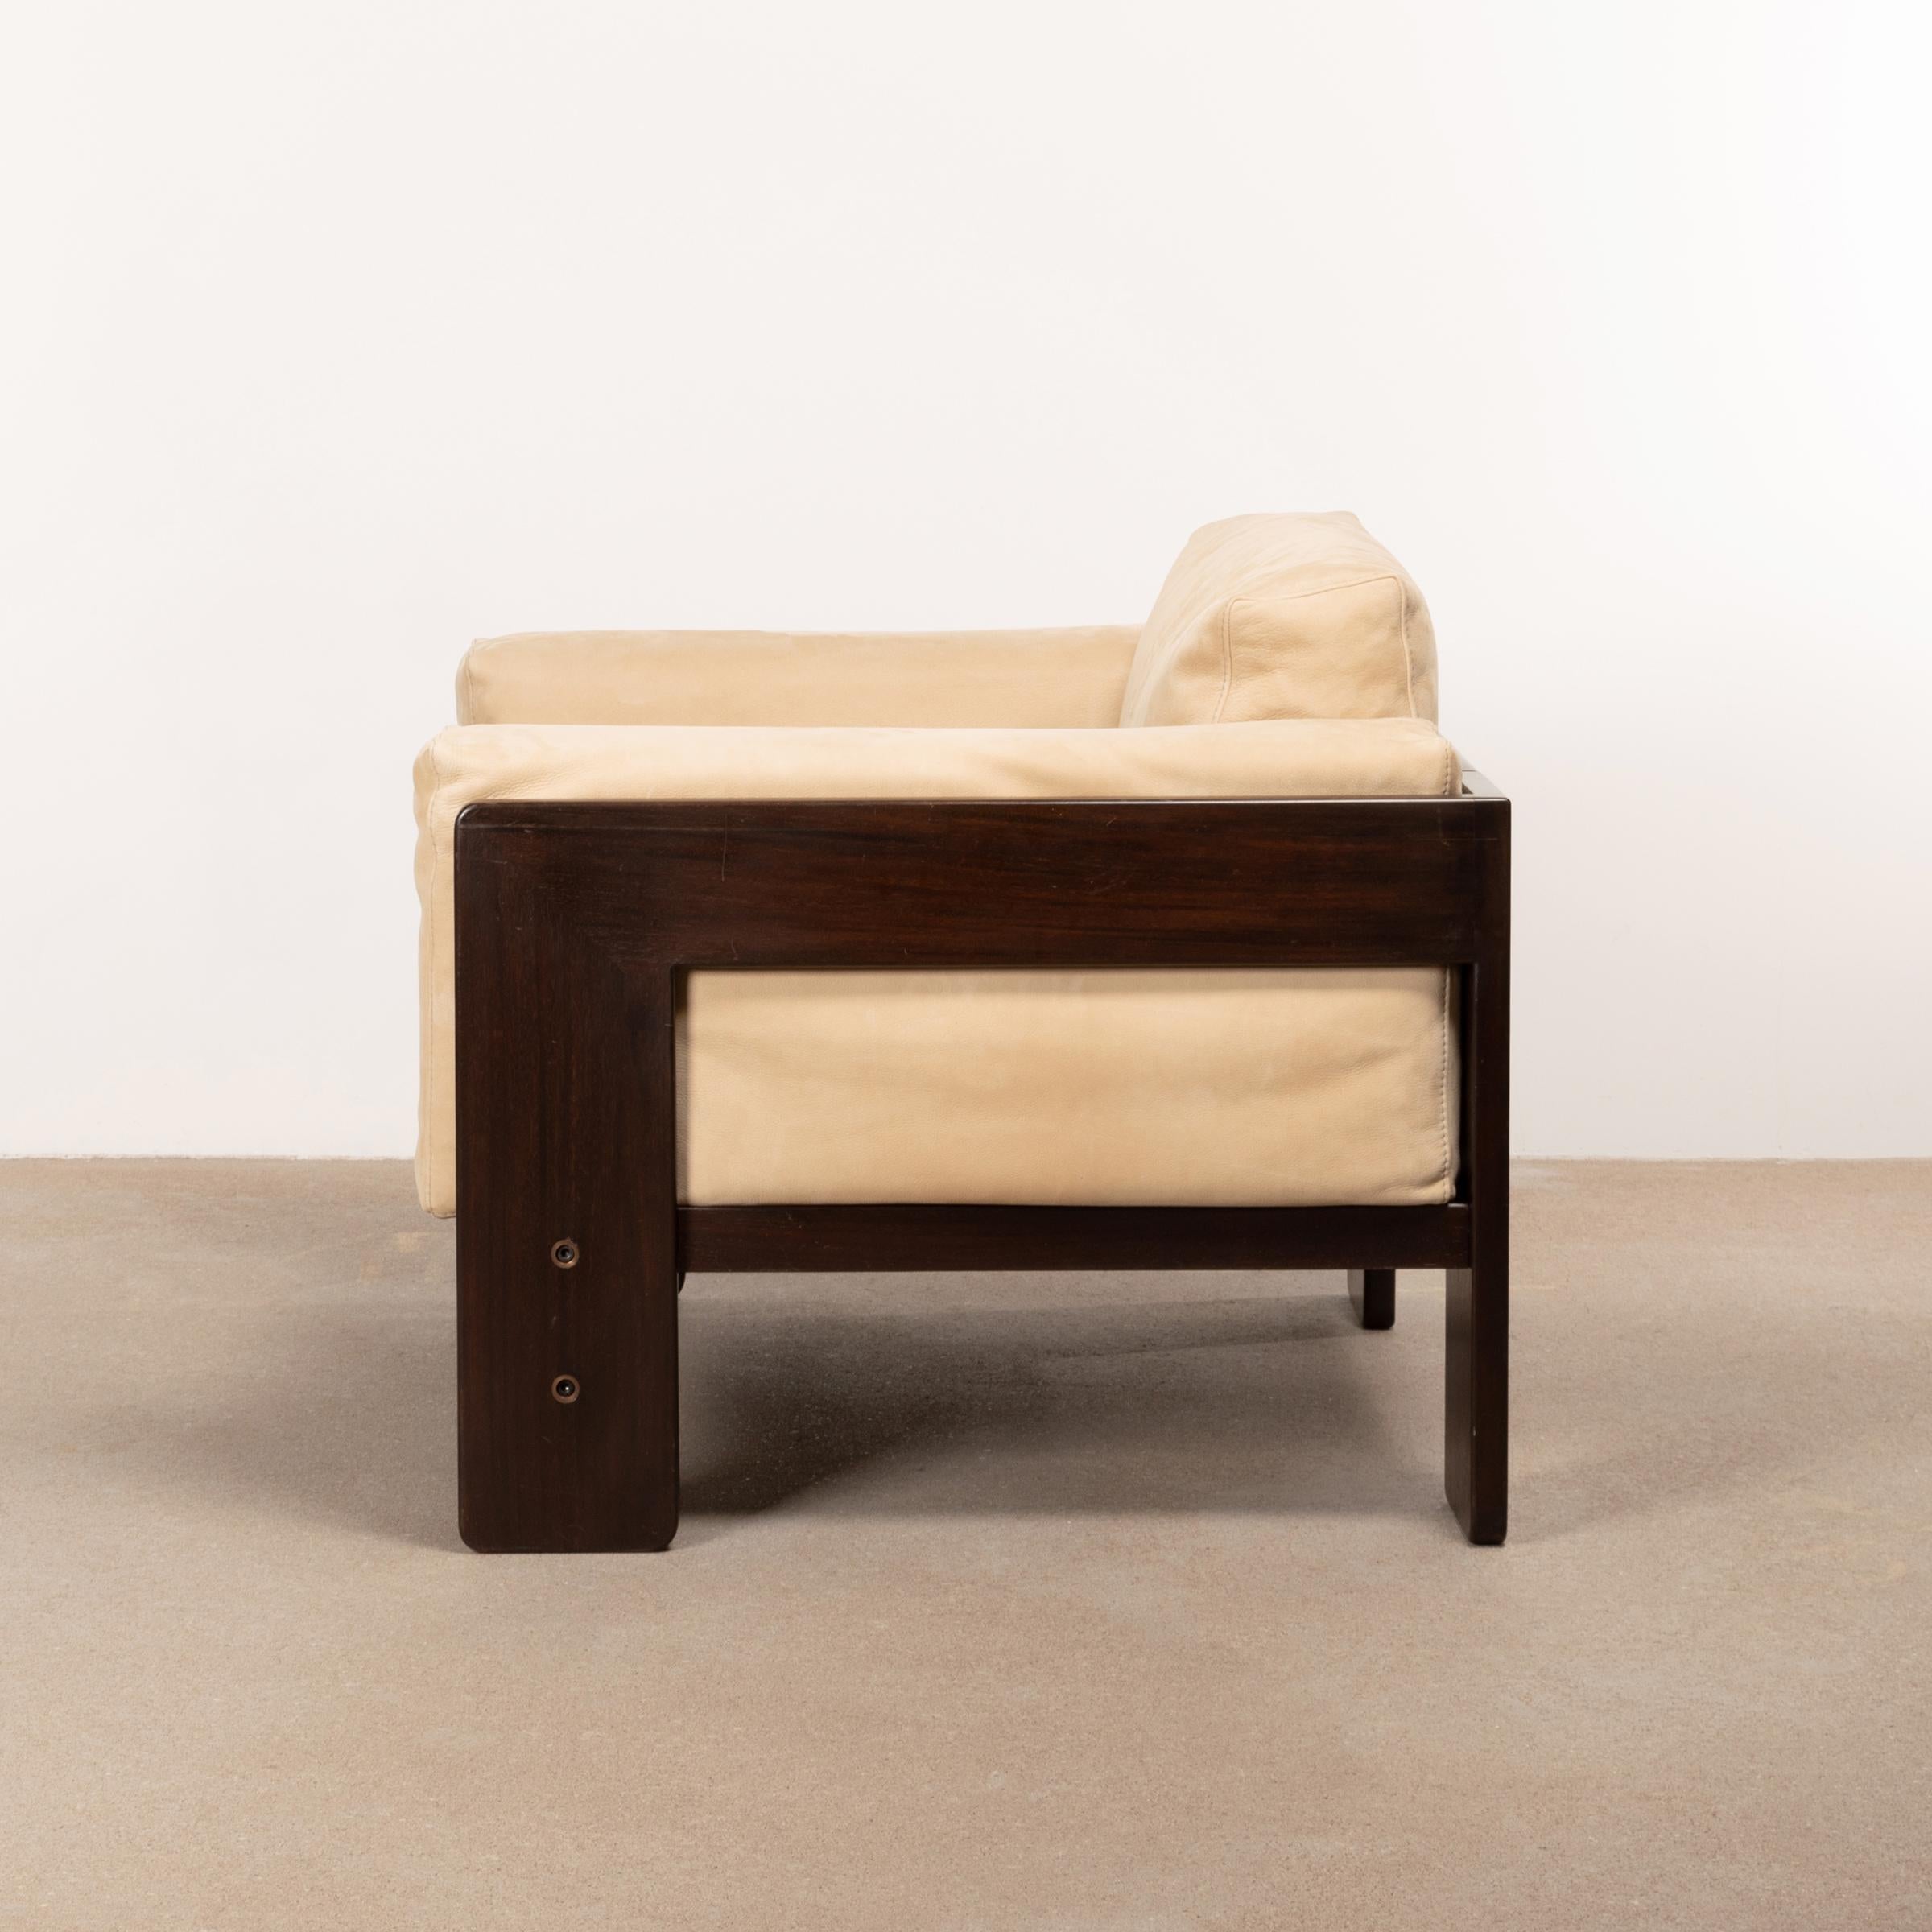 Tobia Scarpa Bastiano Lounge Chairs in Walnut and Beige Suede Leather for Knoll 3